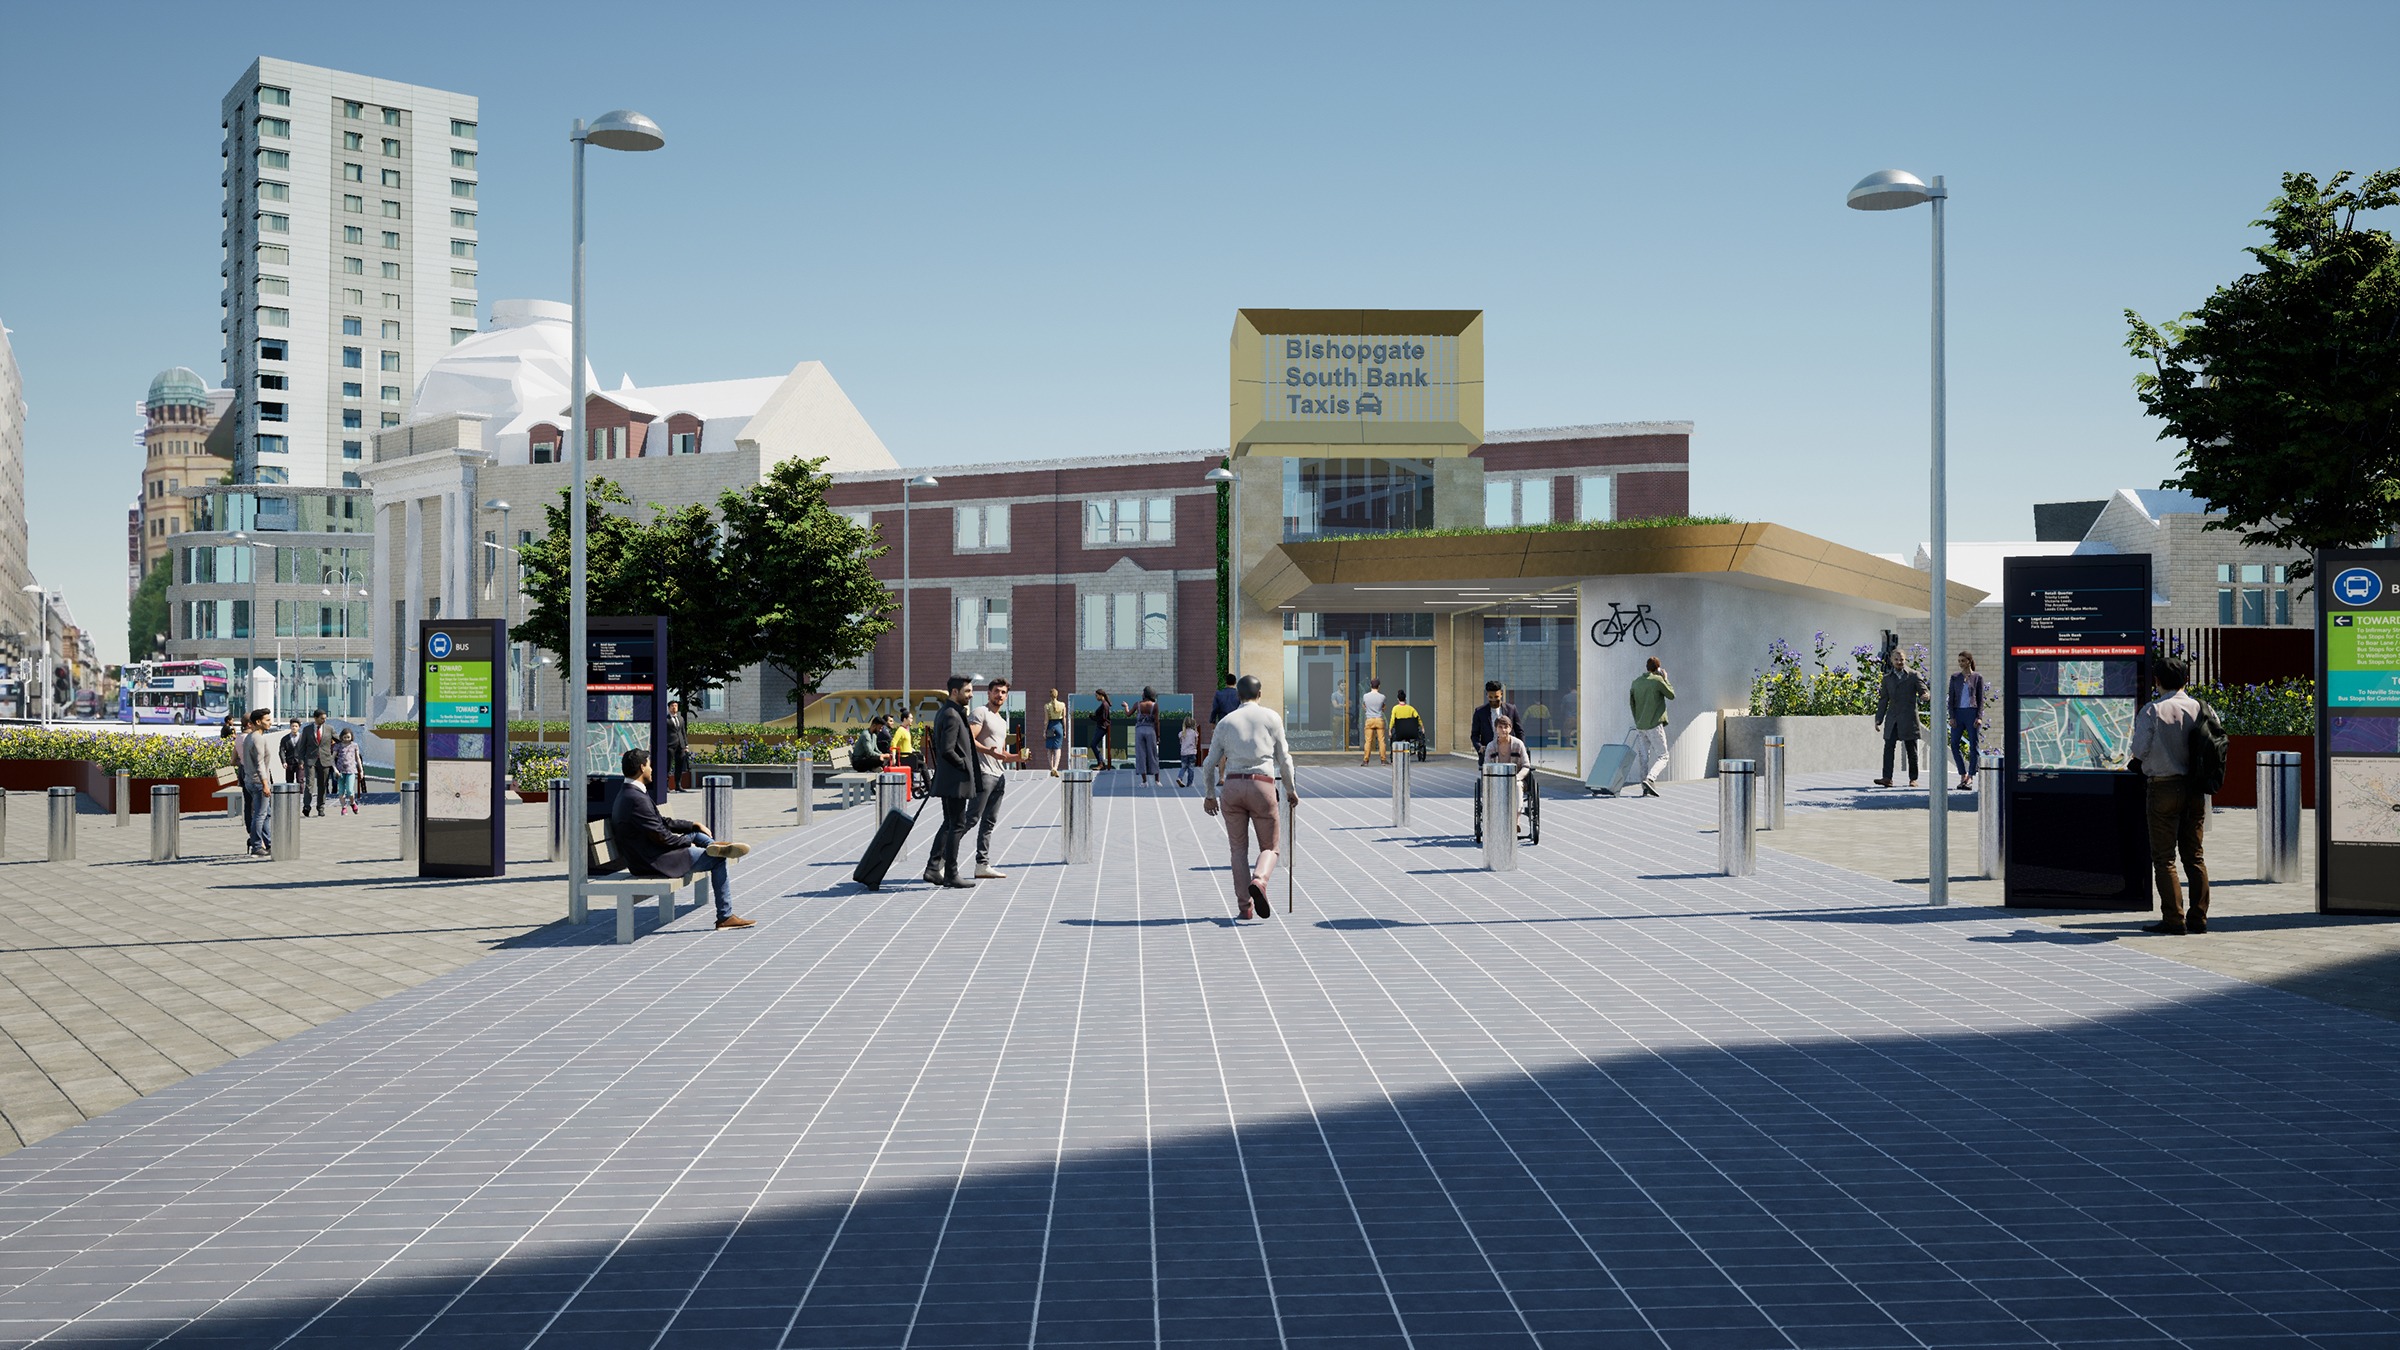 An artistic impression of New station street once the works are delivered. It shows a pedestrianised new station street